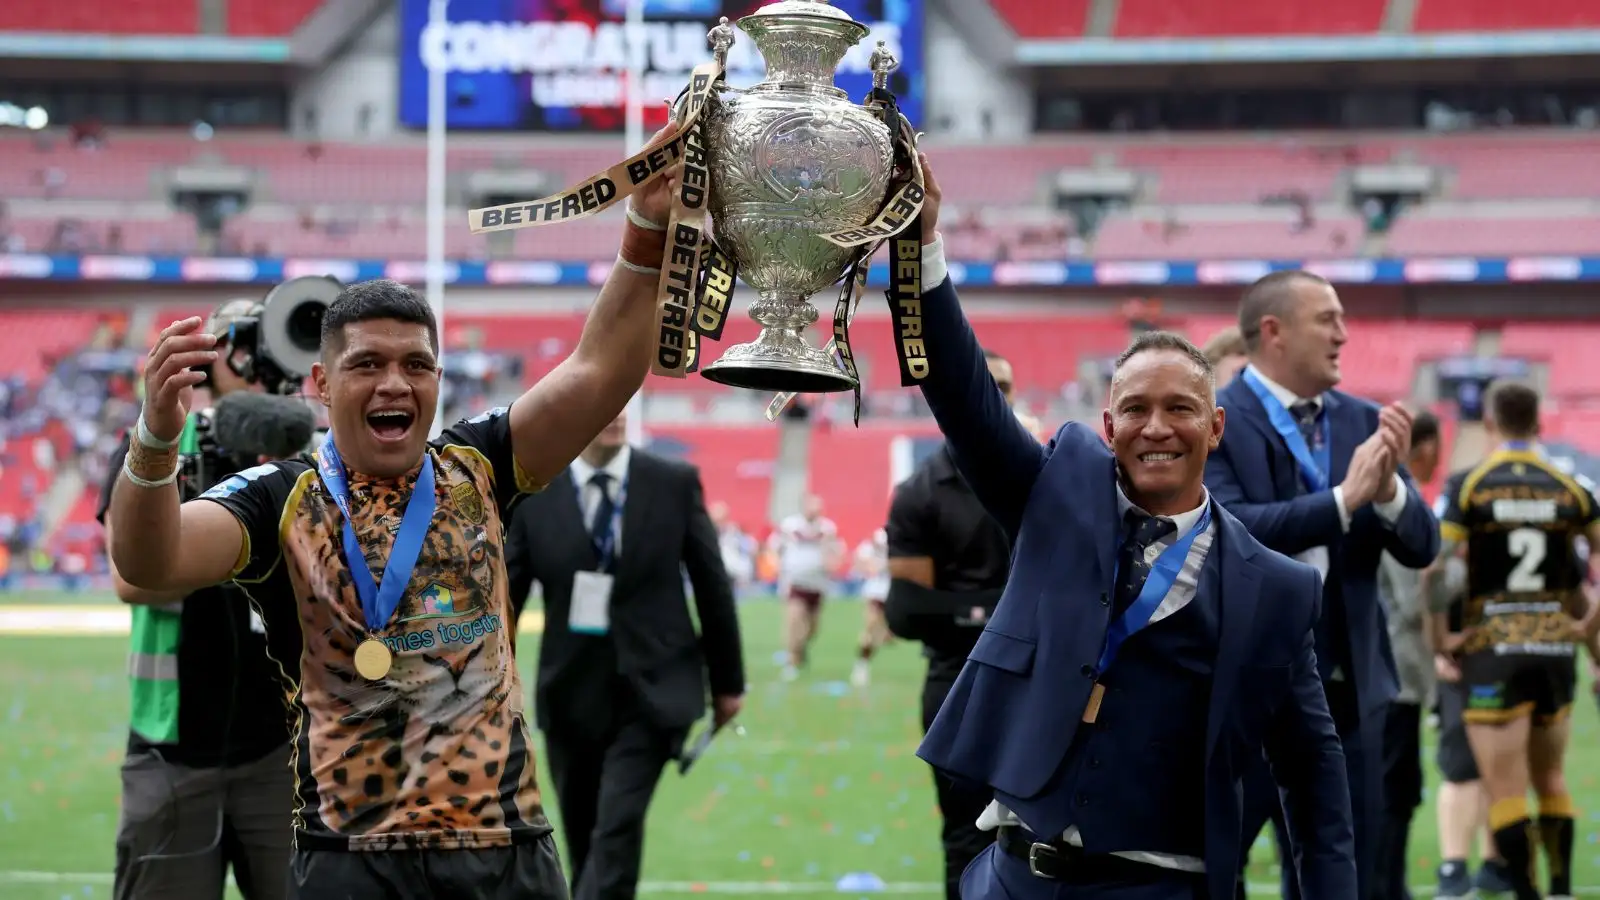 Leigh Leopards coach insists John Asiata does not need to change approach after successful challenge